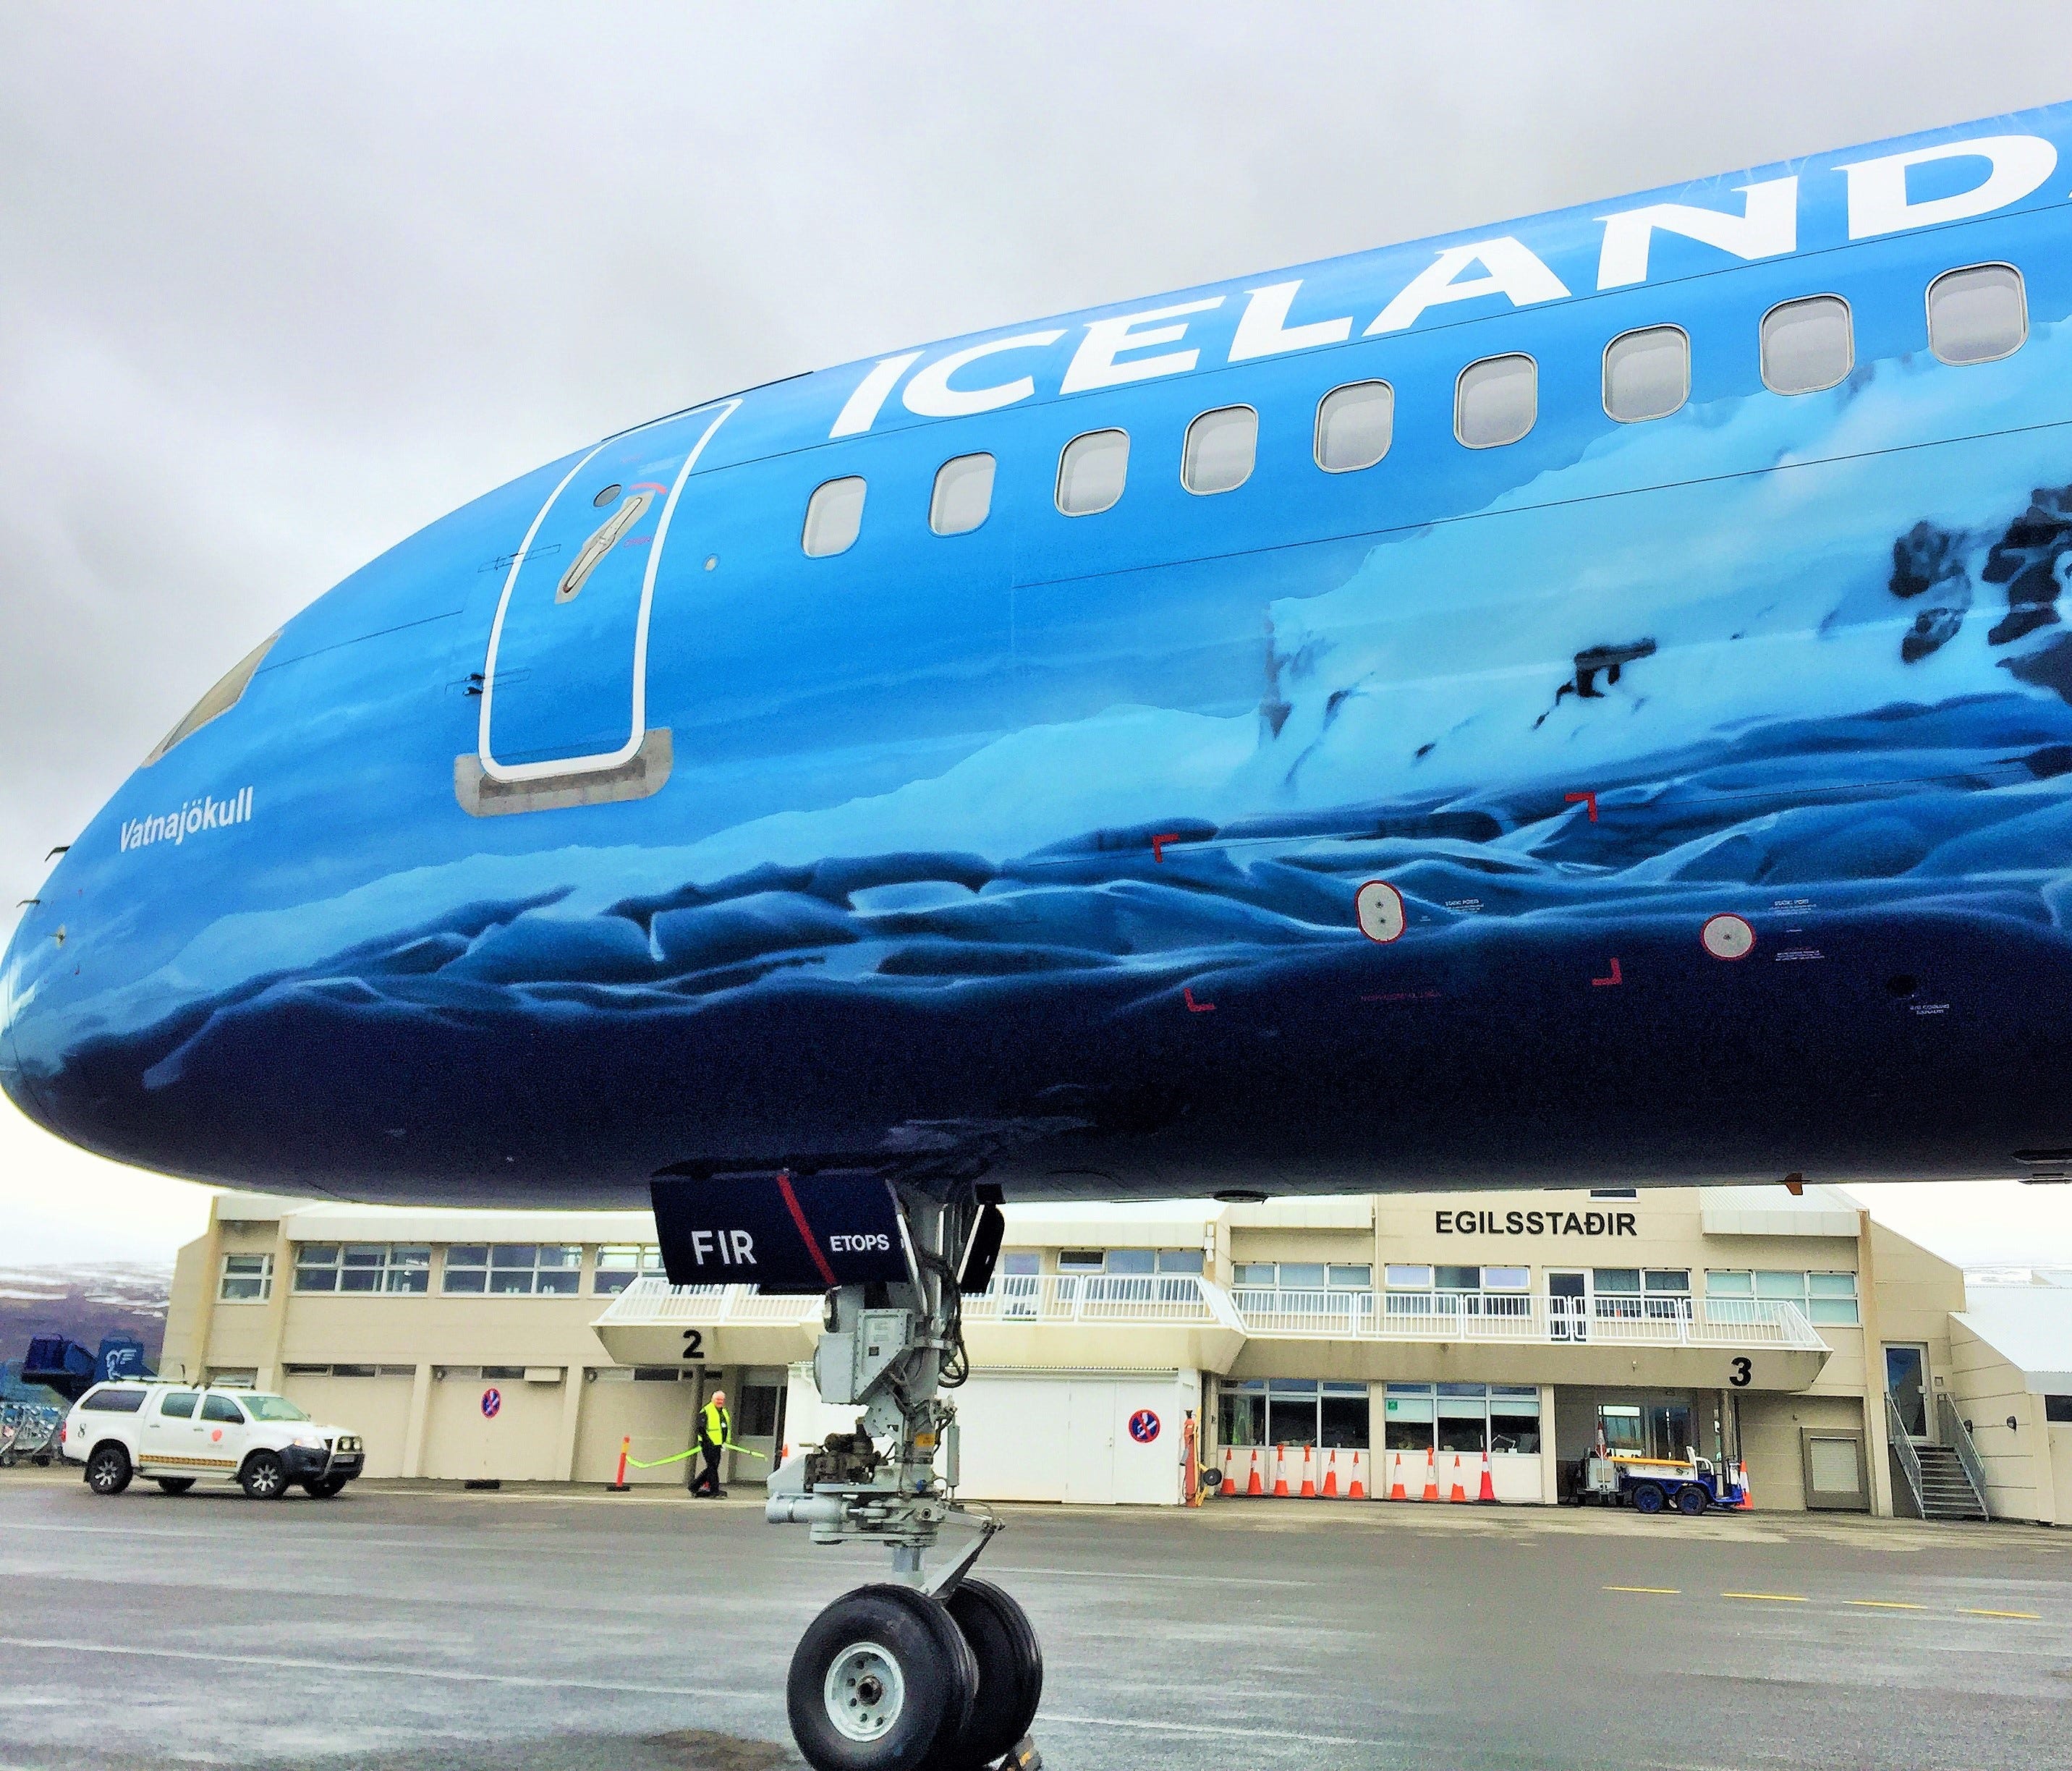 A close-up of the glacier themed plane before it heads back to Reykjavik on May 13, 2017.